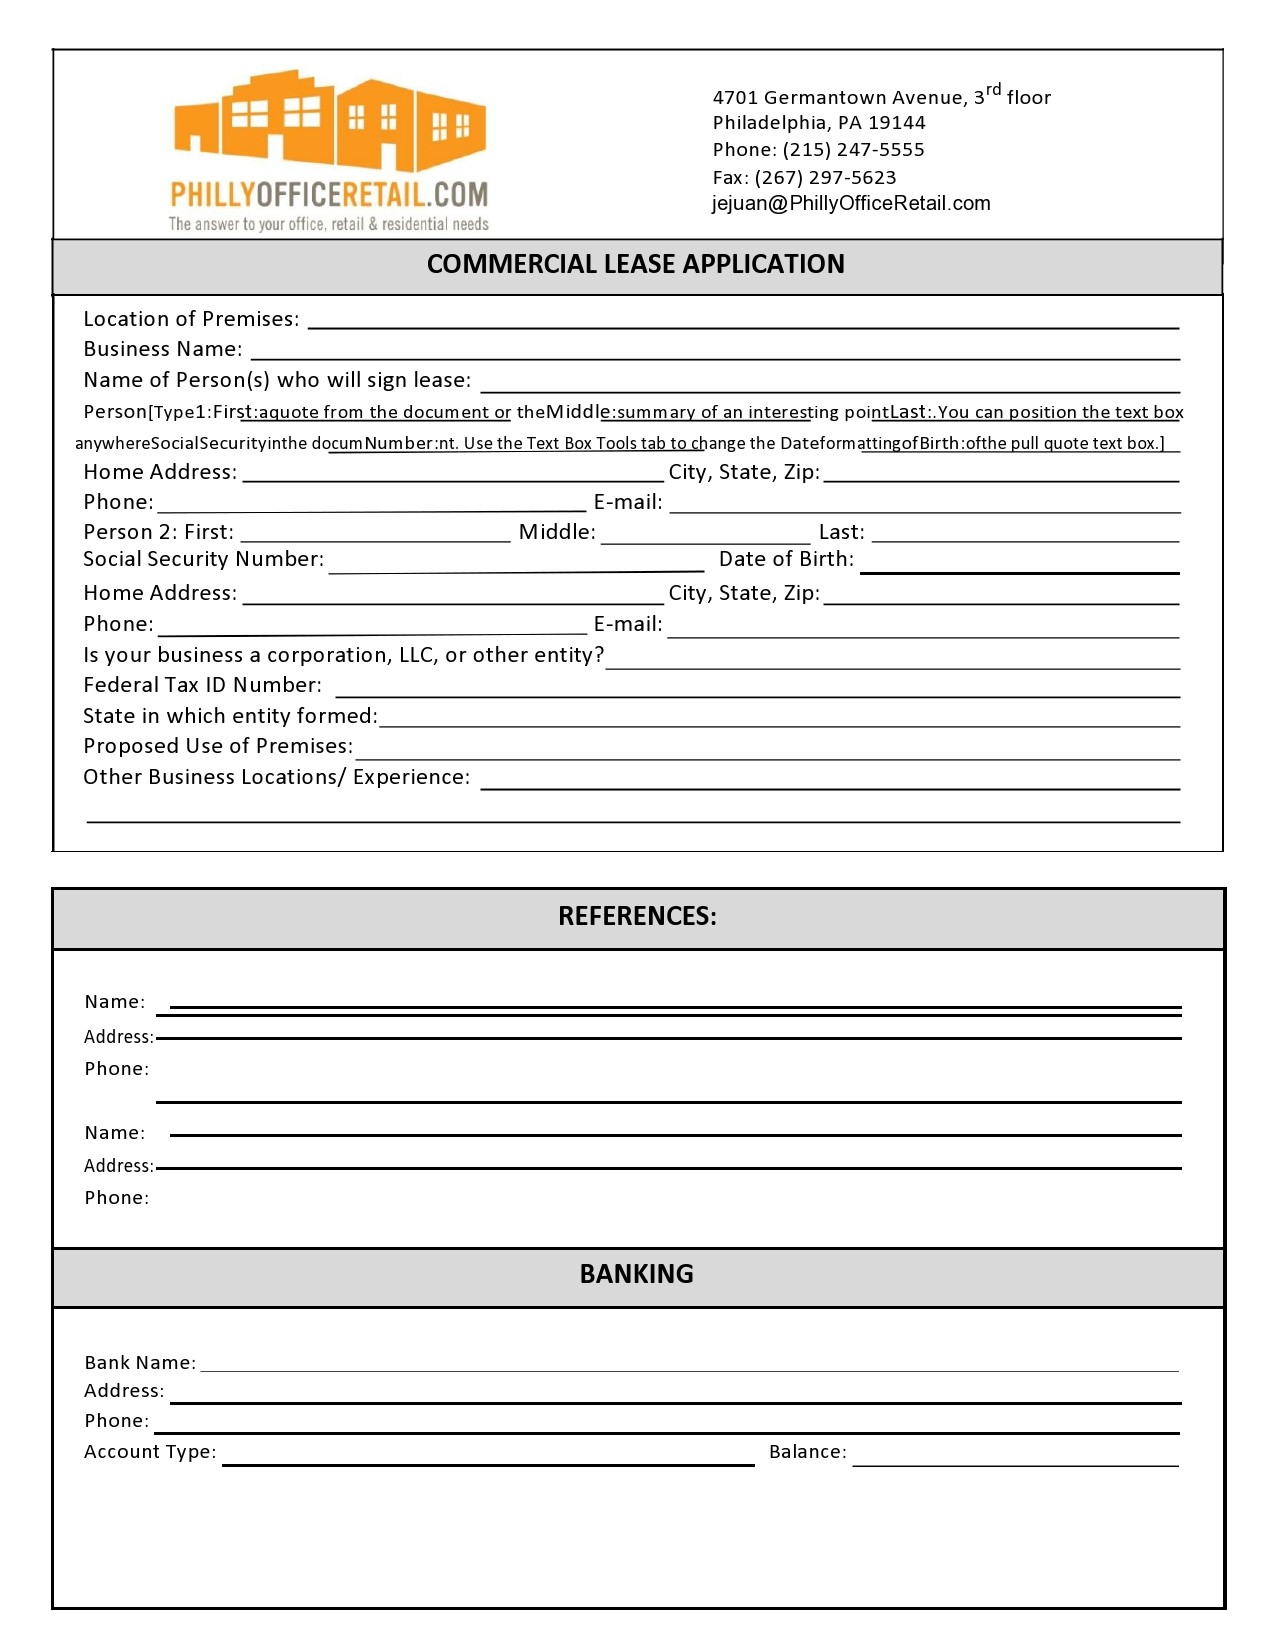 Free commercial lease application 35